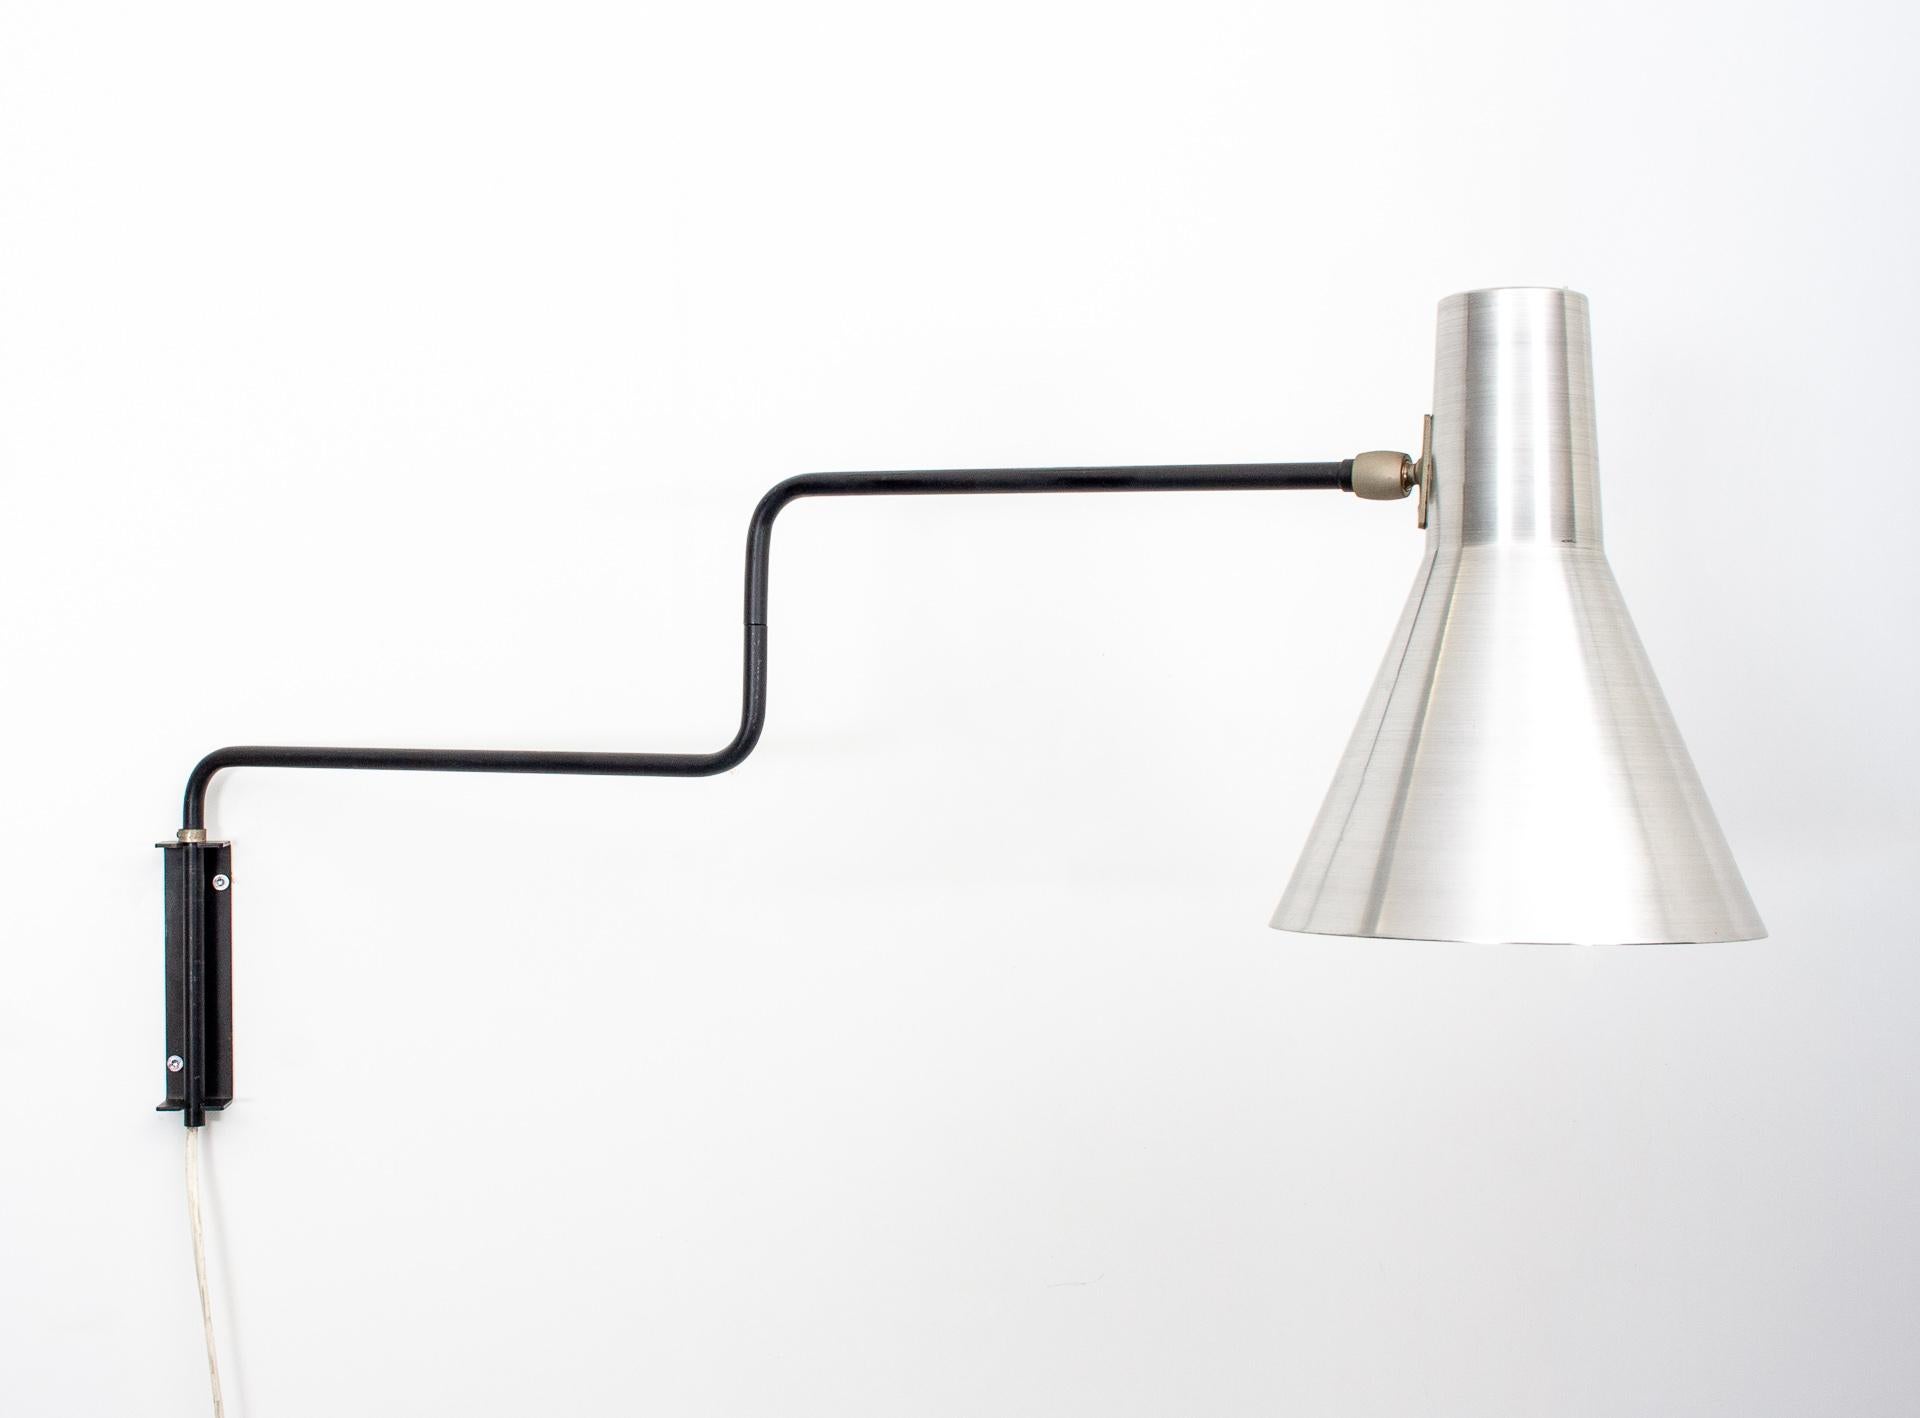 Very nice wall lamp, model 71-01 named Elbow or Paperclip, designed by J.J.M. Hoogervorst in 1958 for Anvia.
The lamp is fully adjustable by the arms as well as the shade. It has Black arms and a Polished Aluminum shade. The lamp is in very good